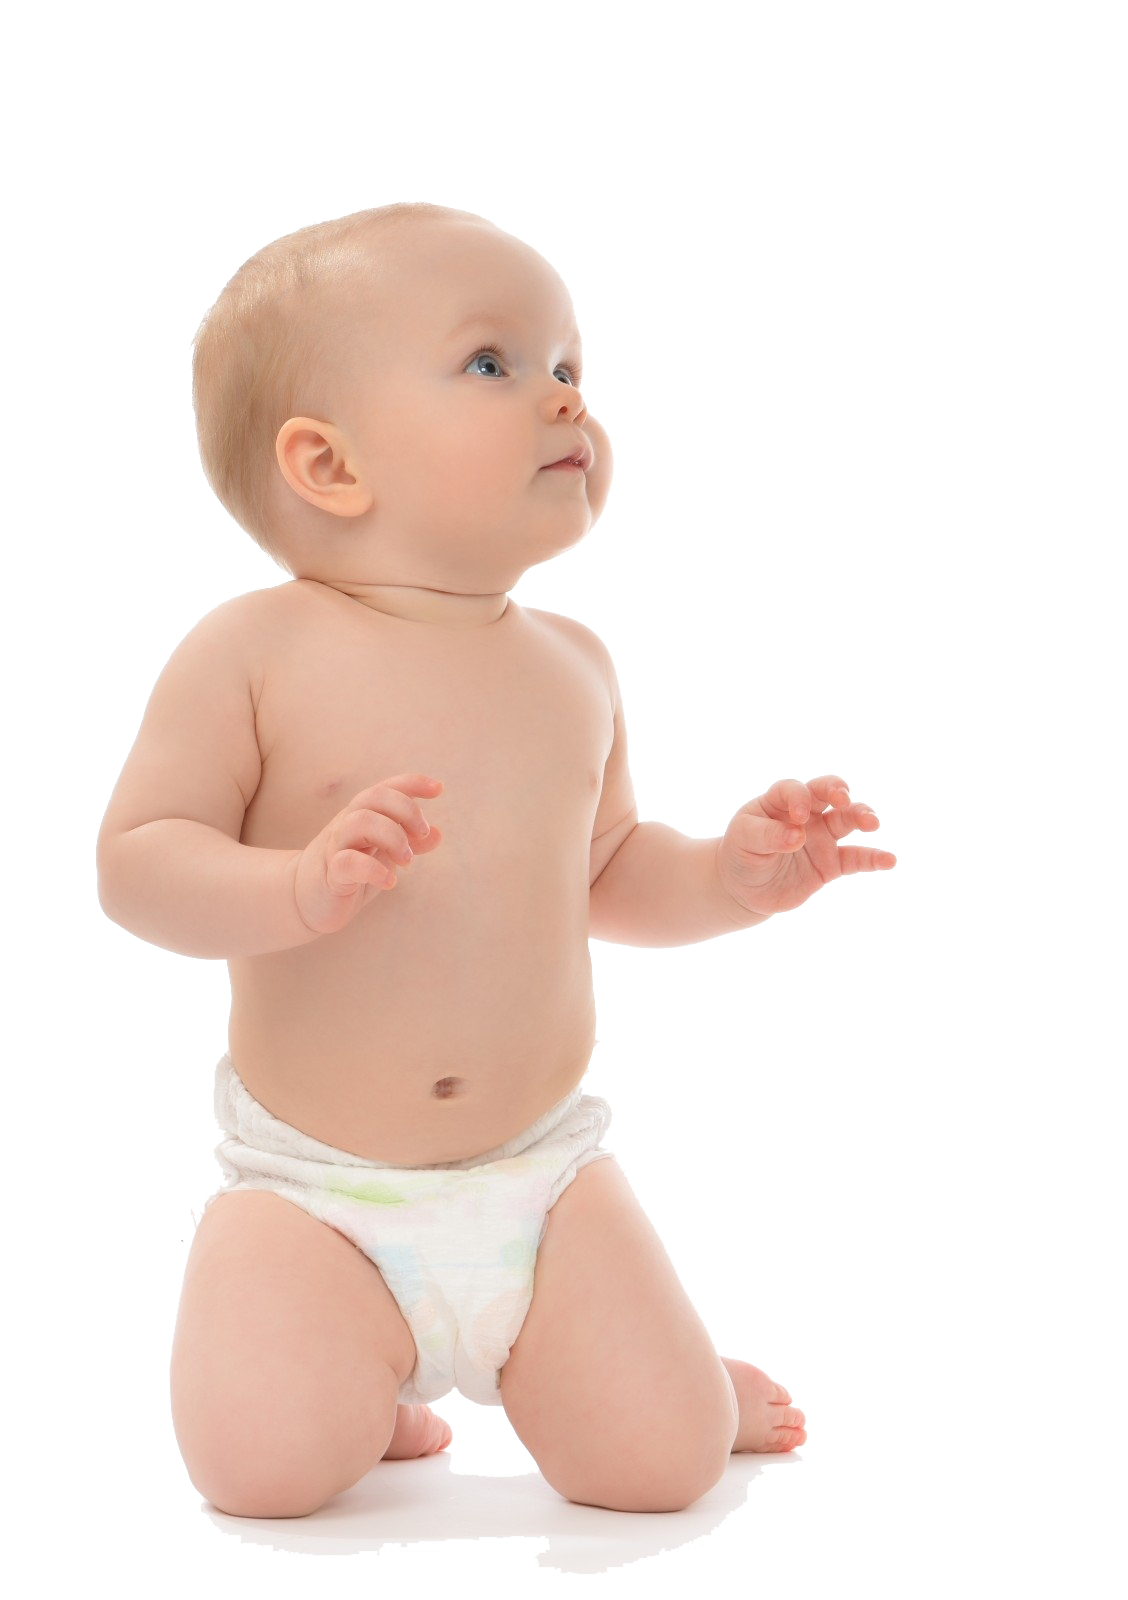 Baby Boys PNG - 152700